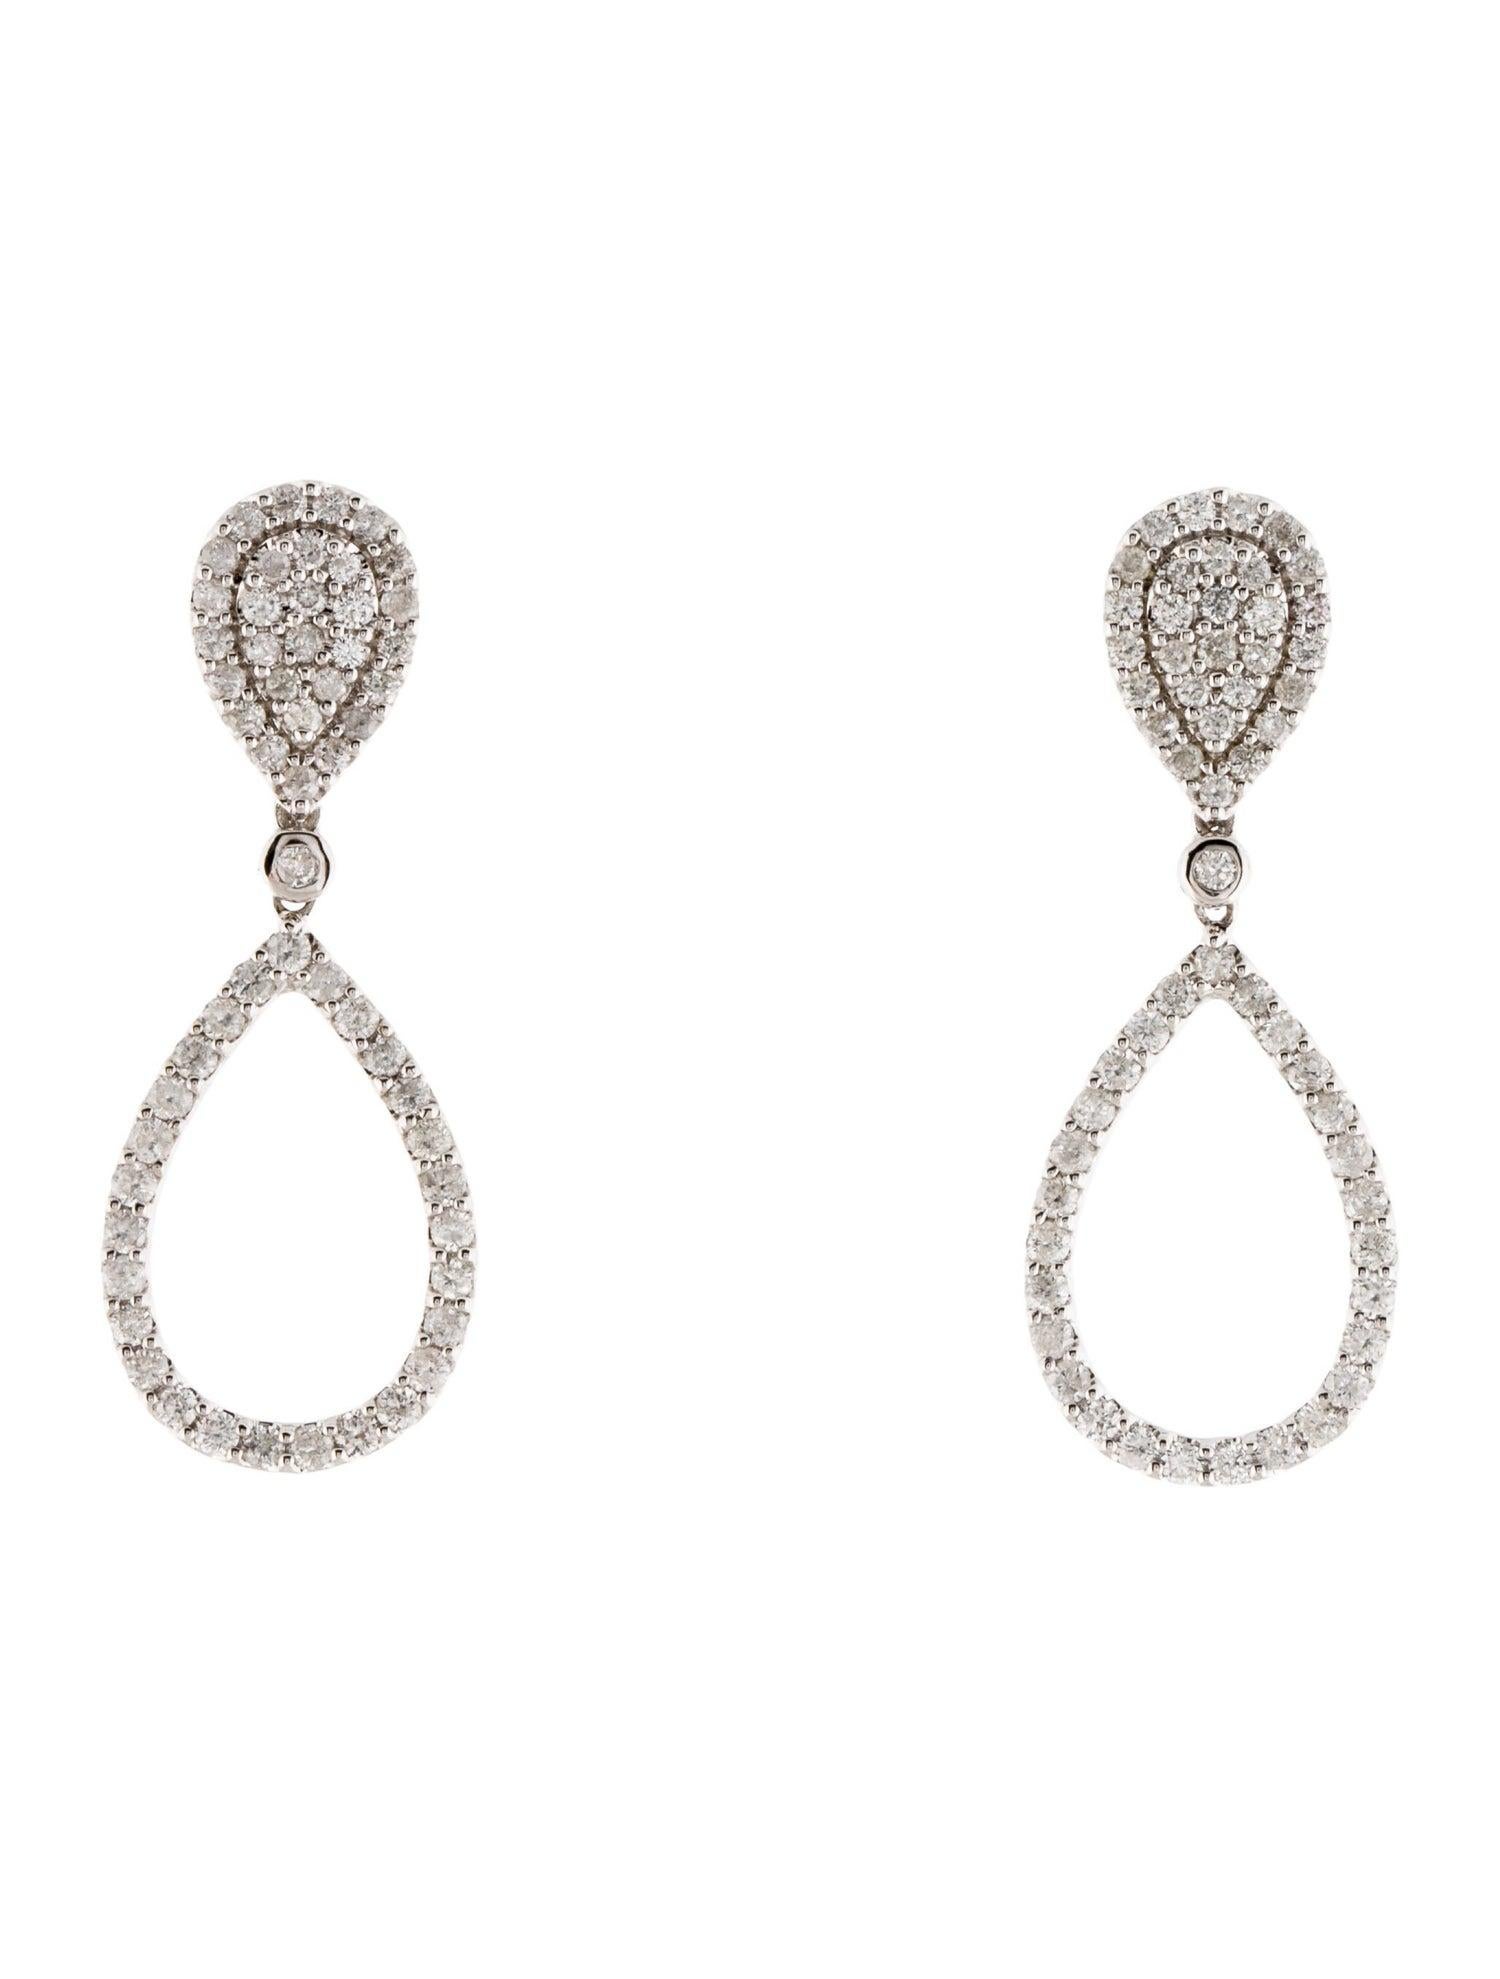 Exquisite 14K Diamond Drop Earrings - 1.40ctw Radiant Beauty & Luxury In New Condition For Sale In Holtsville, NY